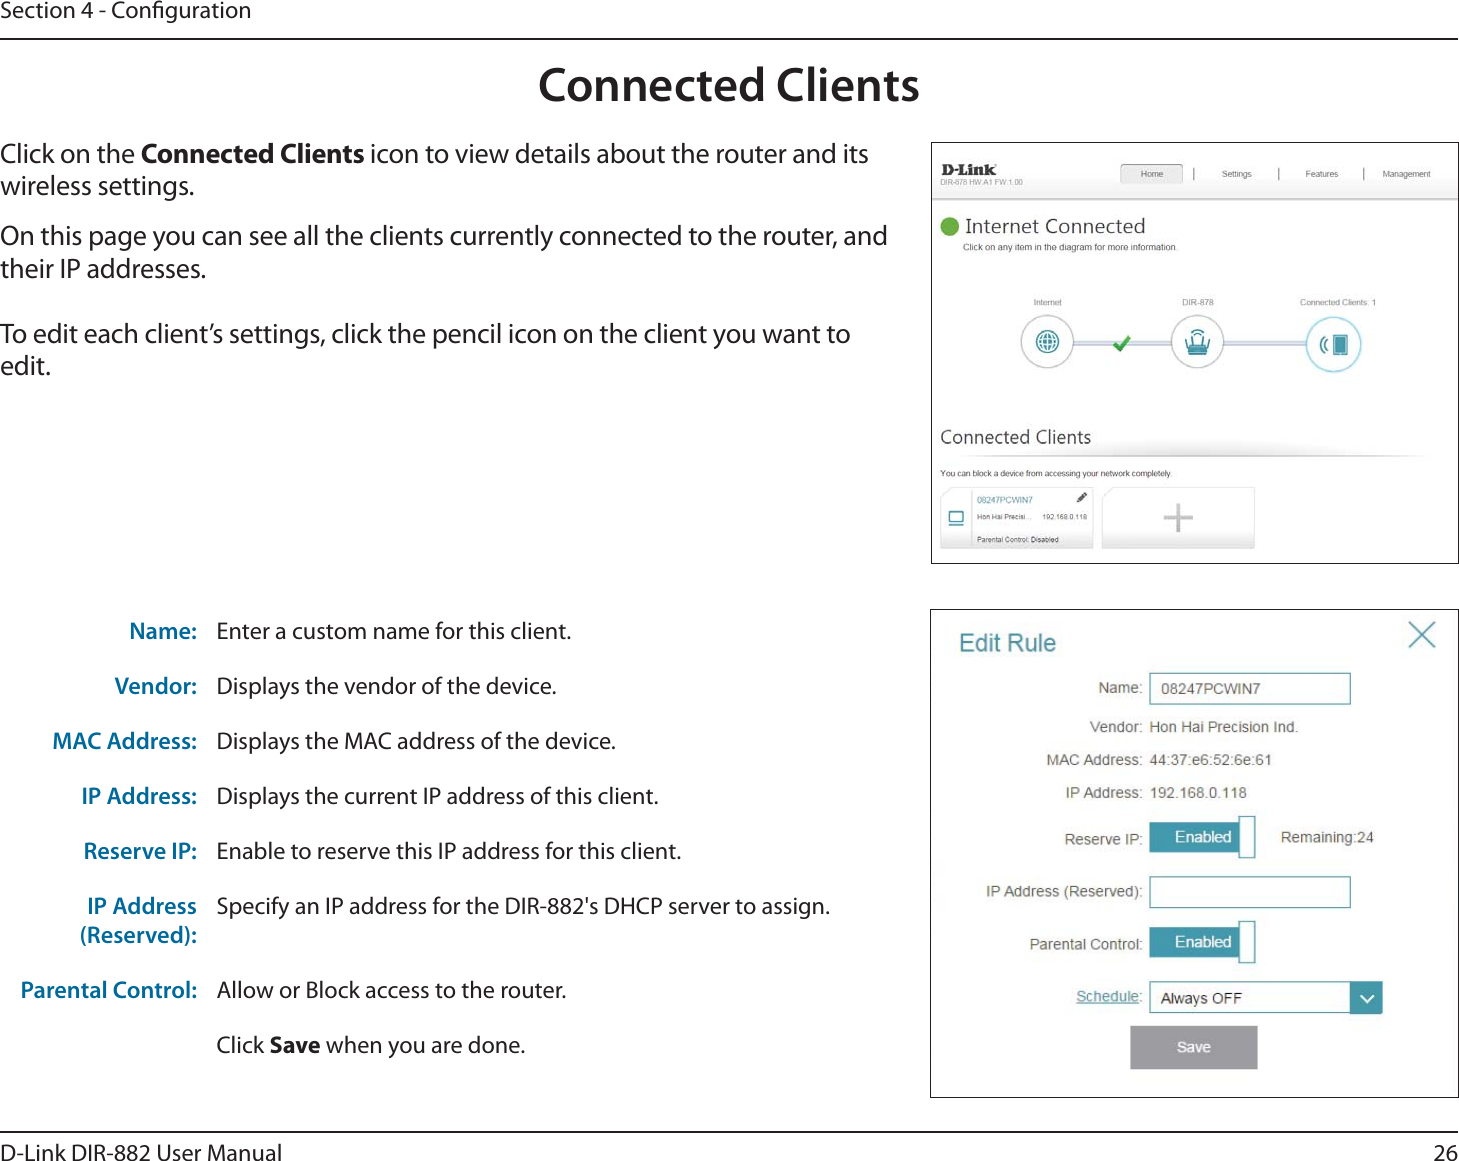 26D-Link DIR-882 User ManualSection 4 - CongurationConnected ClientsClick on the Connected Clients icon to view details about the router and its wireless settings.On this page you can see all the clients currently connected to the router, and their IP addresses.To edit each client’s settings, click the pencil icon on the client you want to edit.Name: Enter a custom name for this client.Vendor: Displays the vendor of the device.MAC Address: Displays the MAC address of the device.IP Address: Displays the current IP address of this client.Reserve IP: Enable to reserve this IP address for this client.IP Address (Reserved):Specify an IP address for the DIR-882&apos;s DHCP server to assign.Parental Control: Allow or Block access to the router.Click Save when you are done.